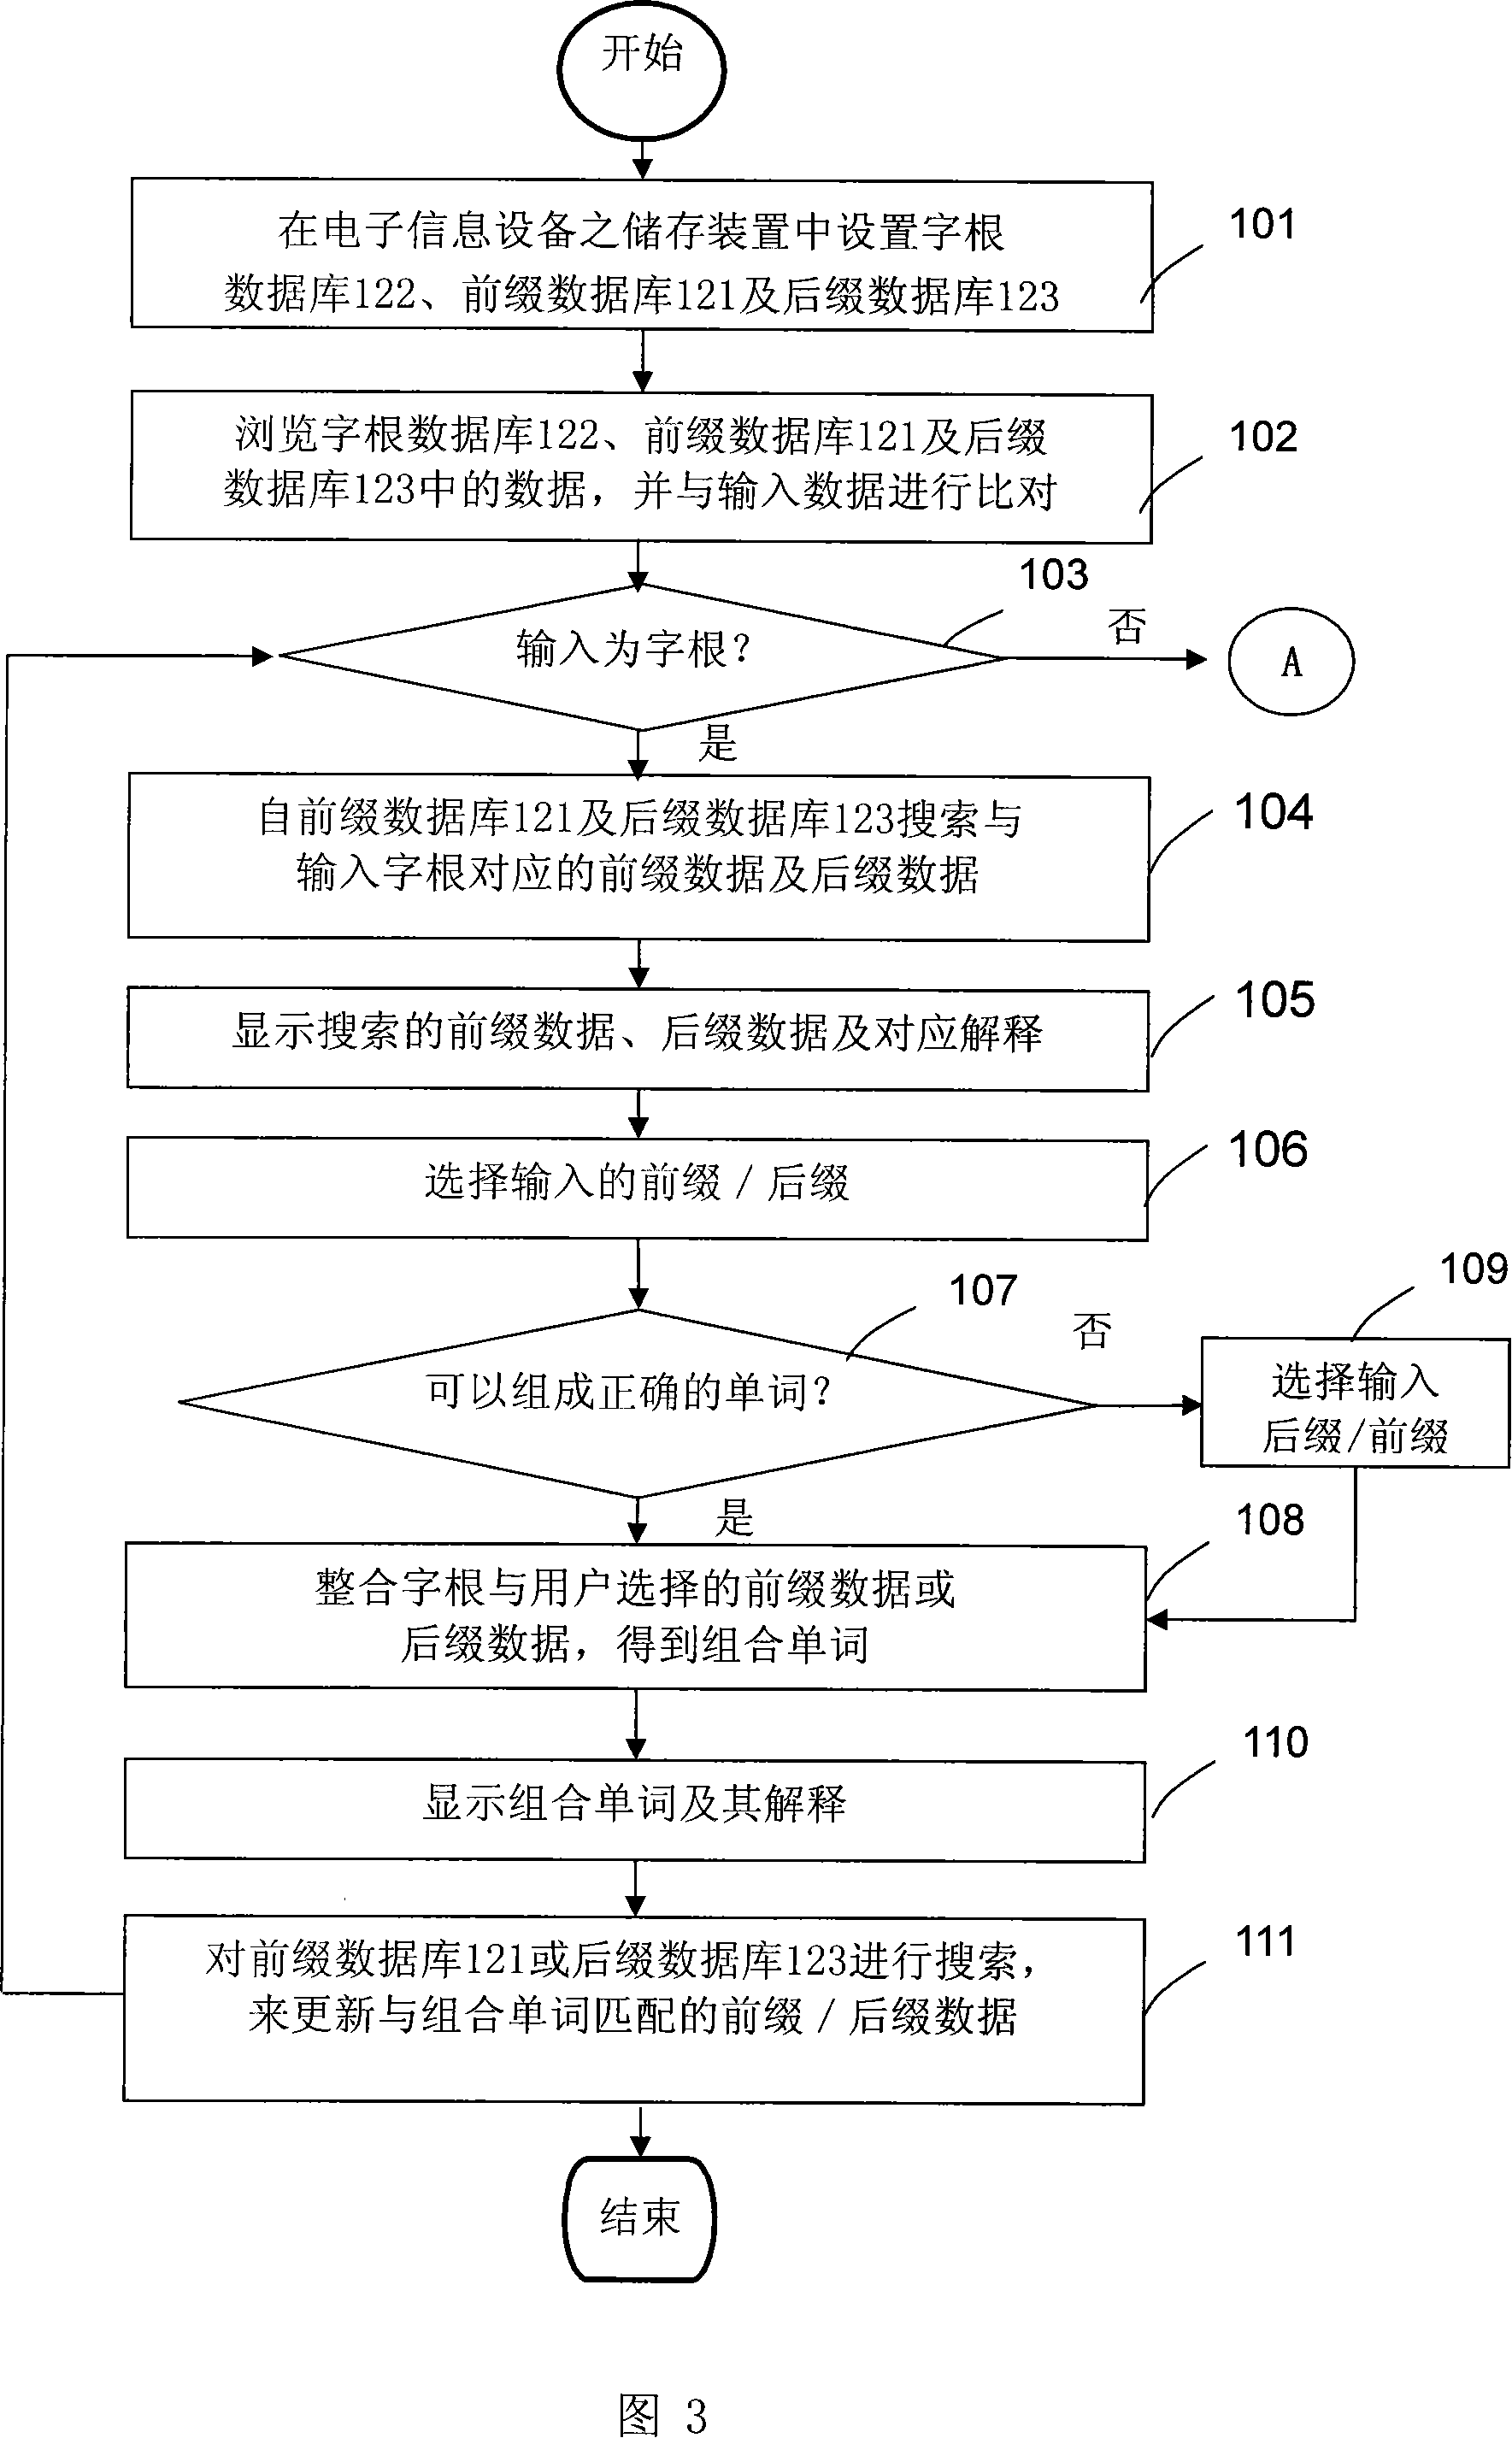 System and method for quickly inquiring foreign language words